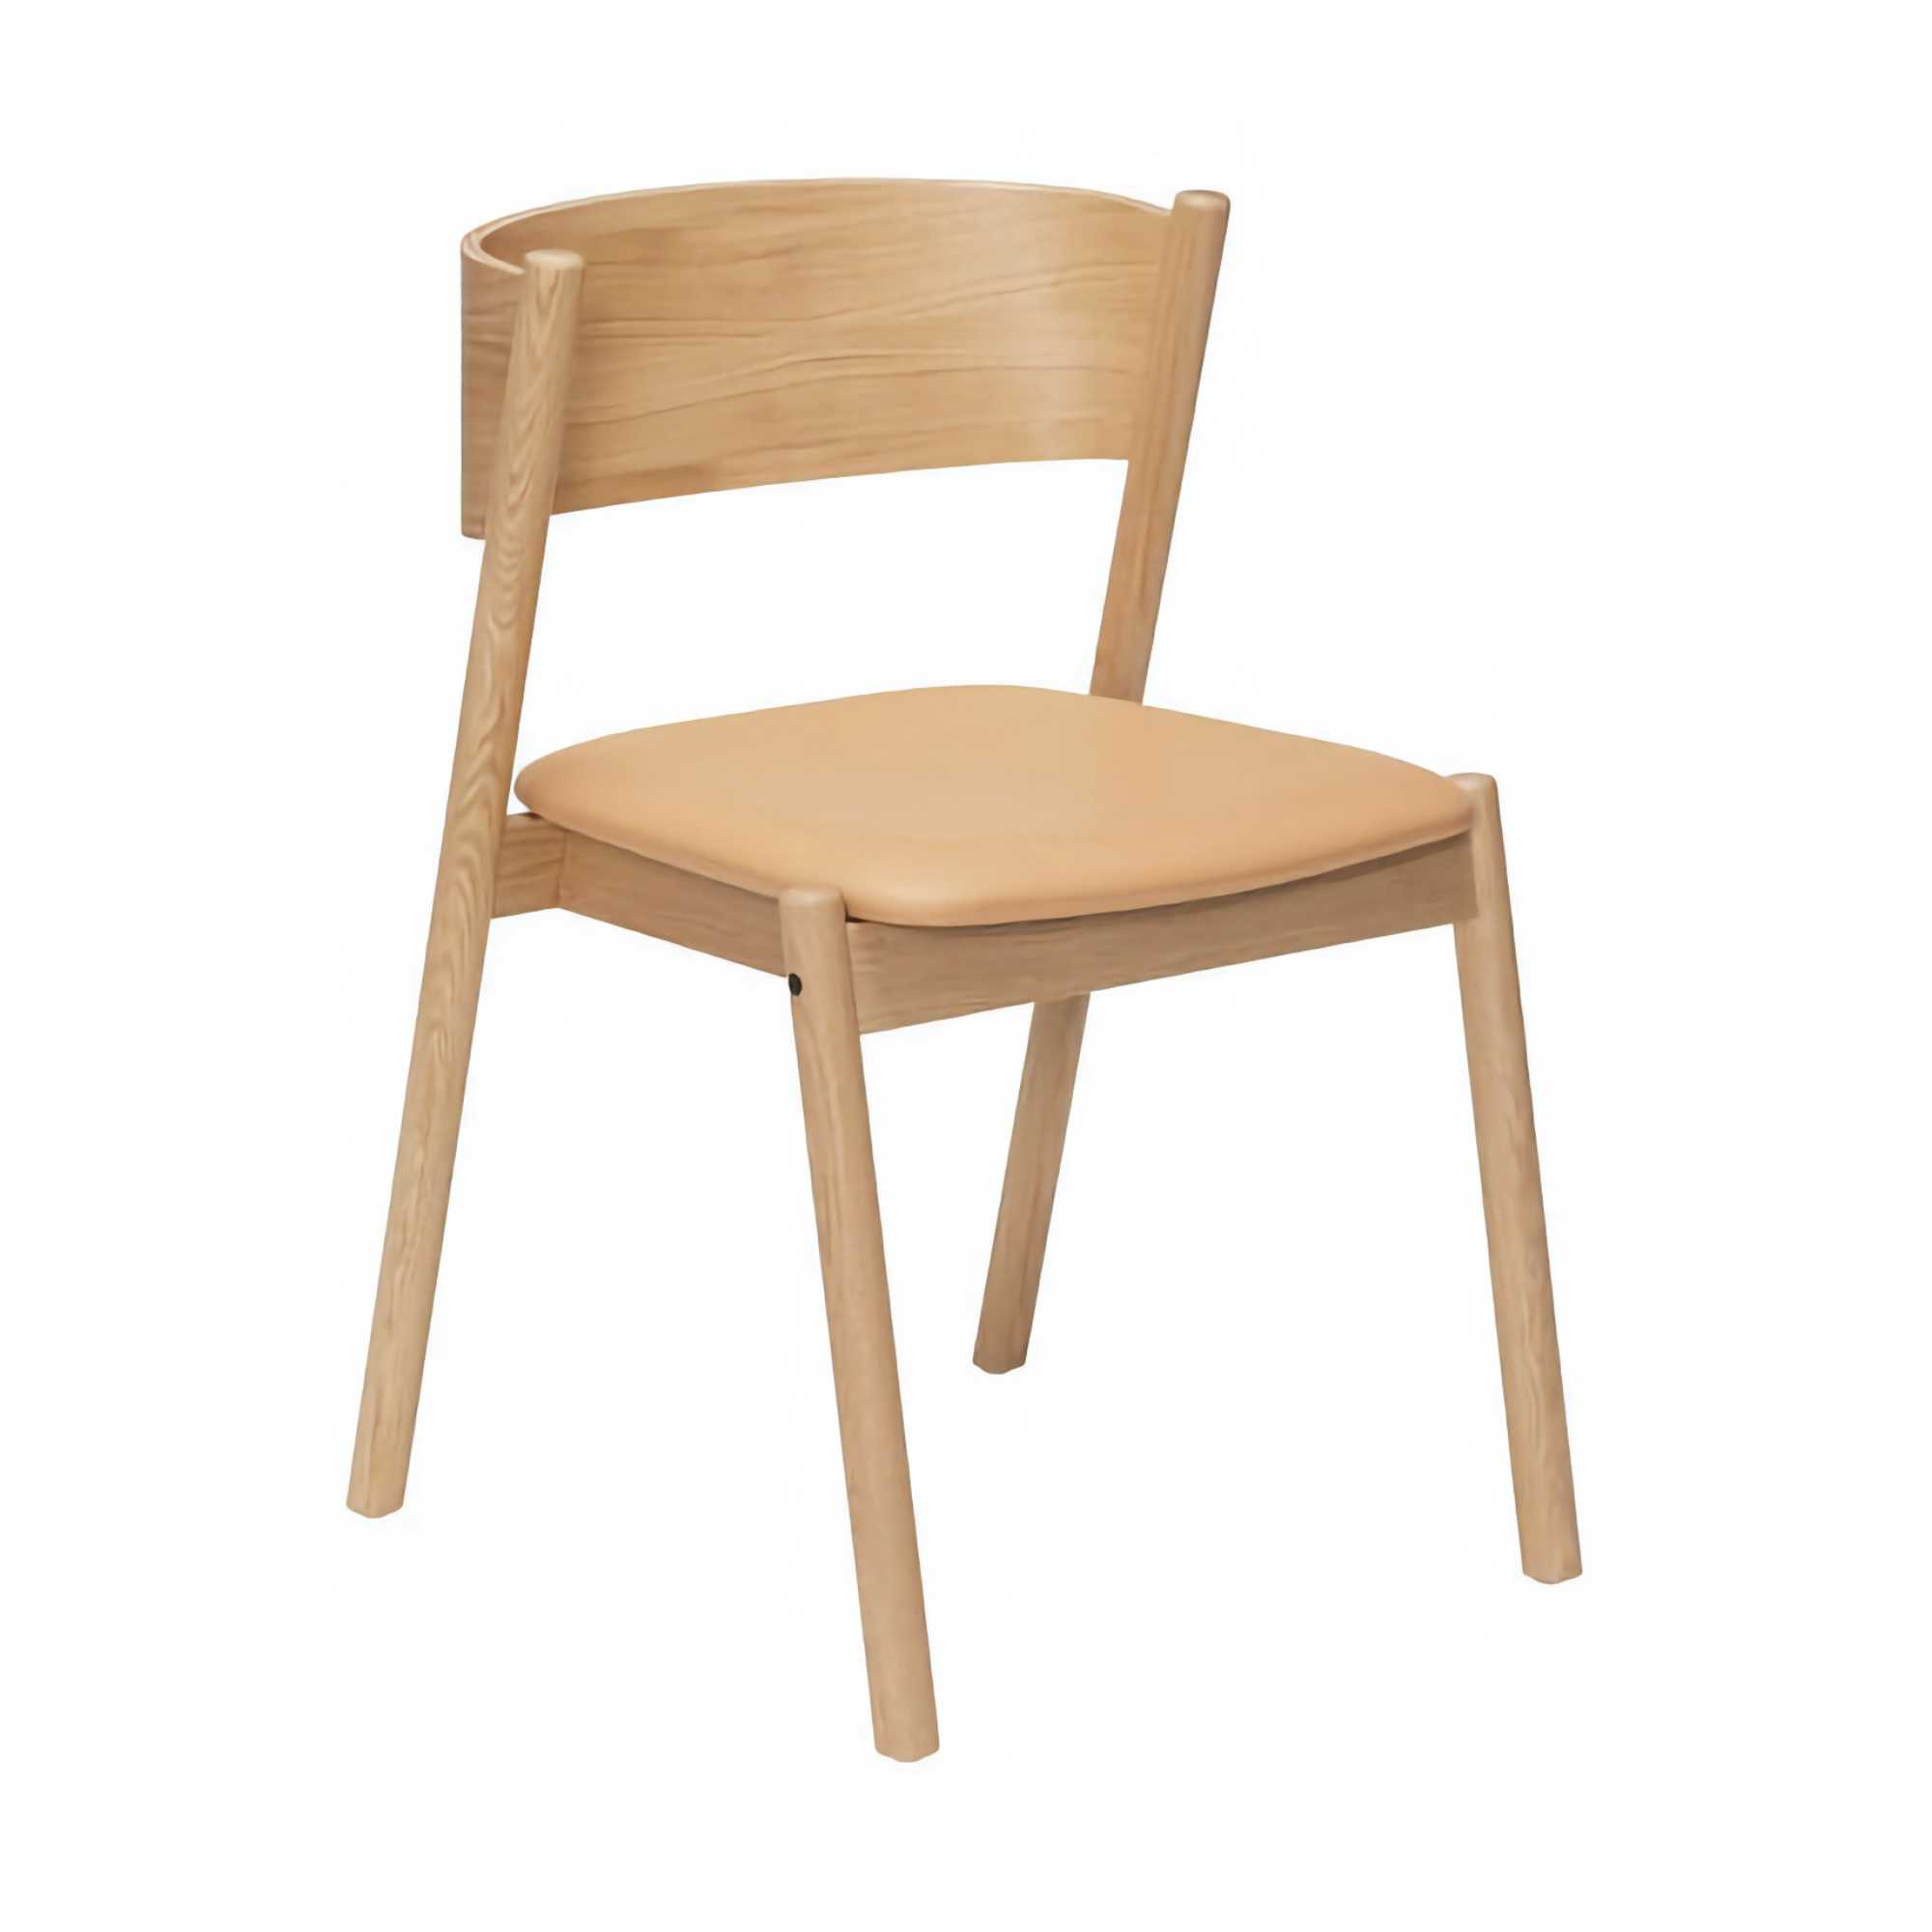 Hübsch Oblique Dining Chair Seat Natural